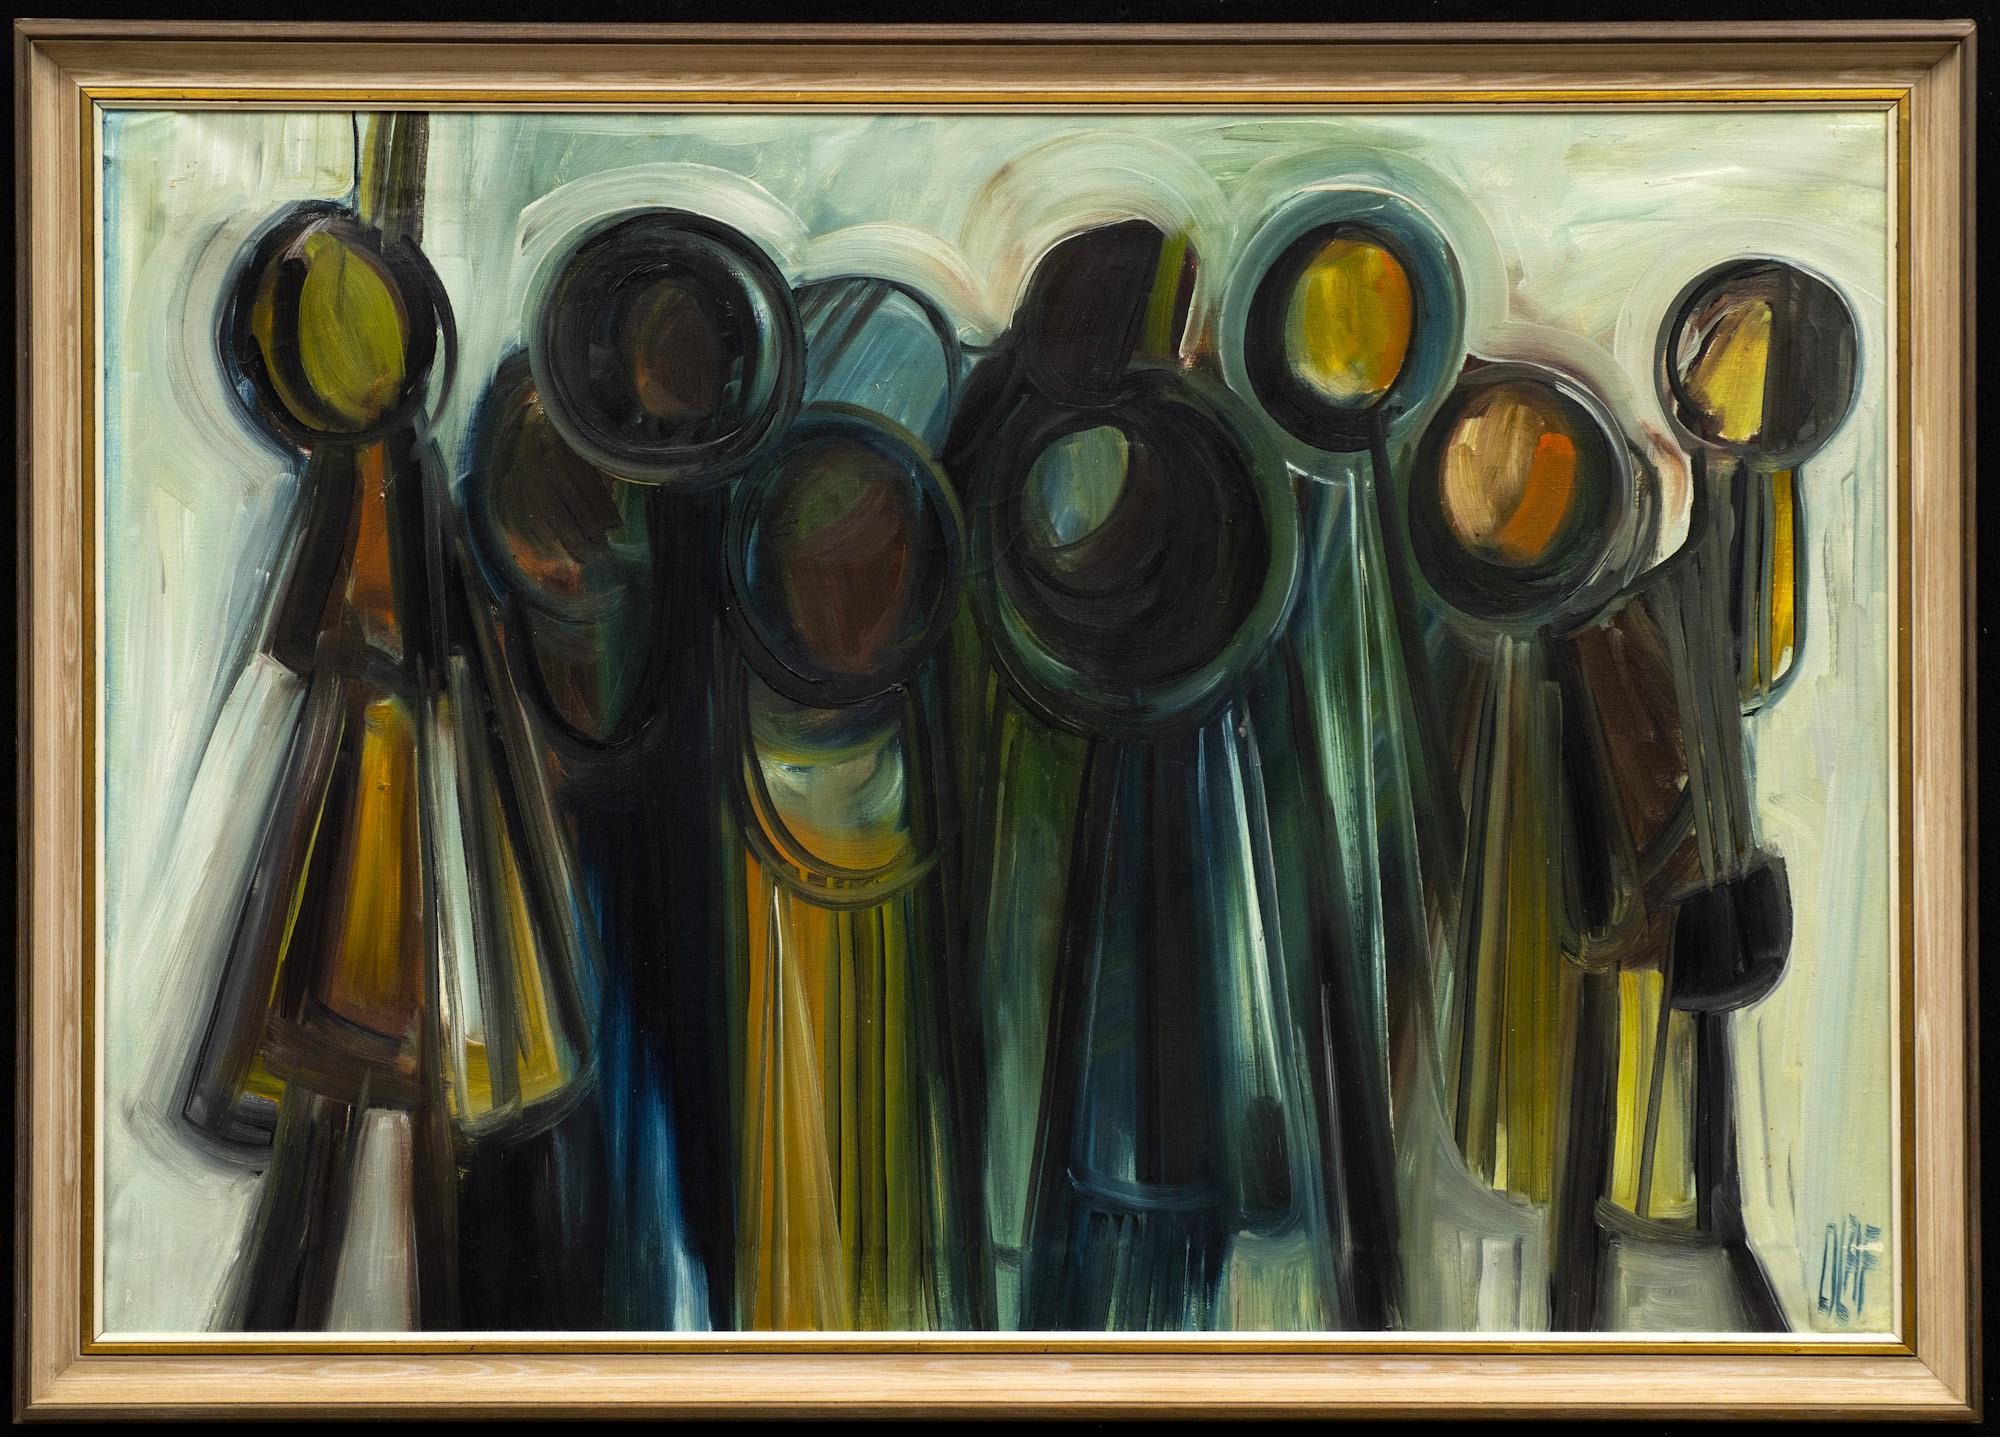 "The Power (People)" 1970 
Olaf Karlsen (b. 1947)
Oil on canvas
Signed front and back.
28 1/4 x 40 inches (frame)

Olaf Karlsen  has managed to remain a man of mystery so there's not a great deal written about him but the the majority of his